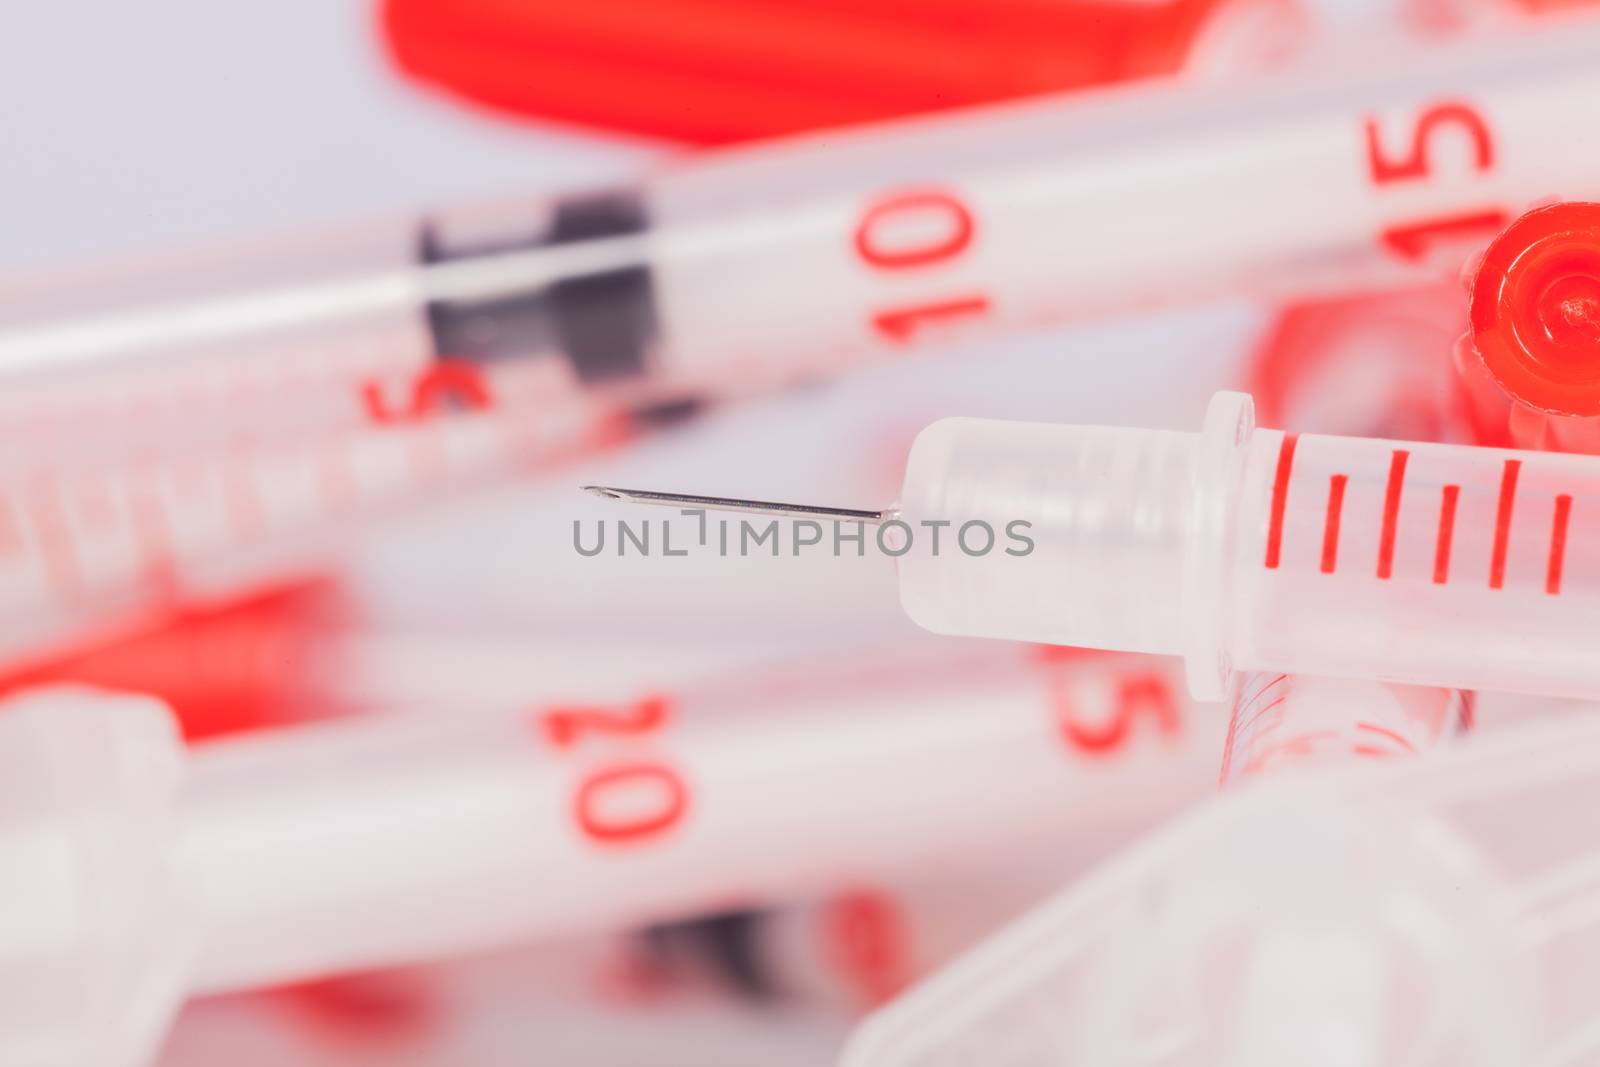 Pile of Empty Syringes with Red Safety Caps by juniart